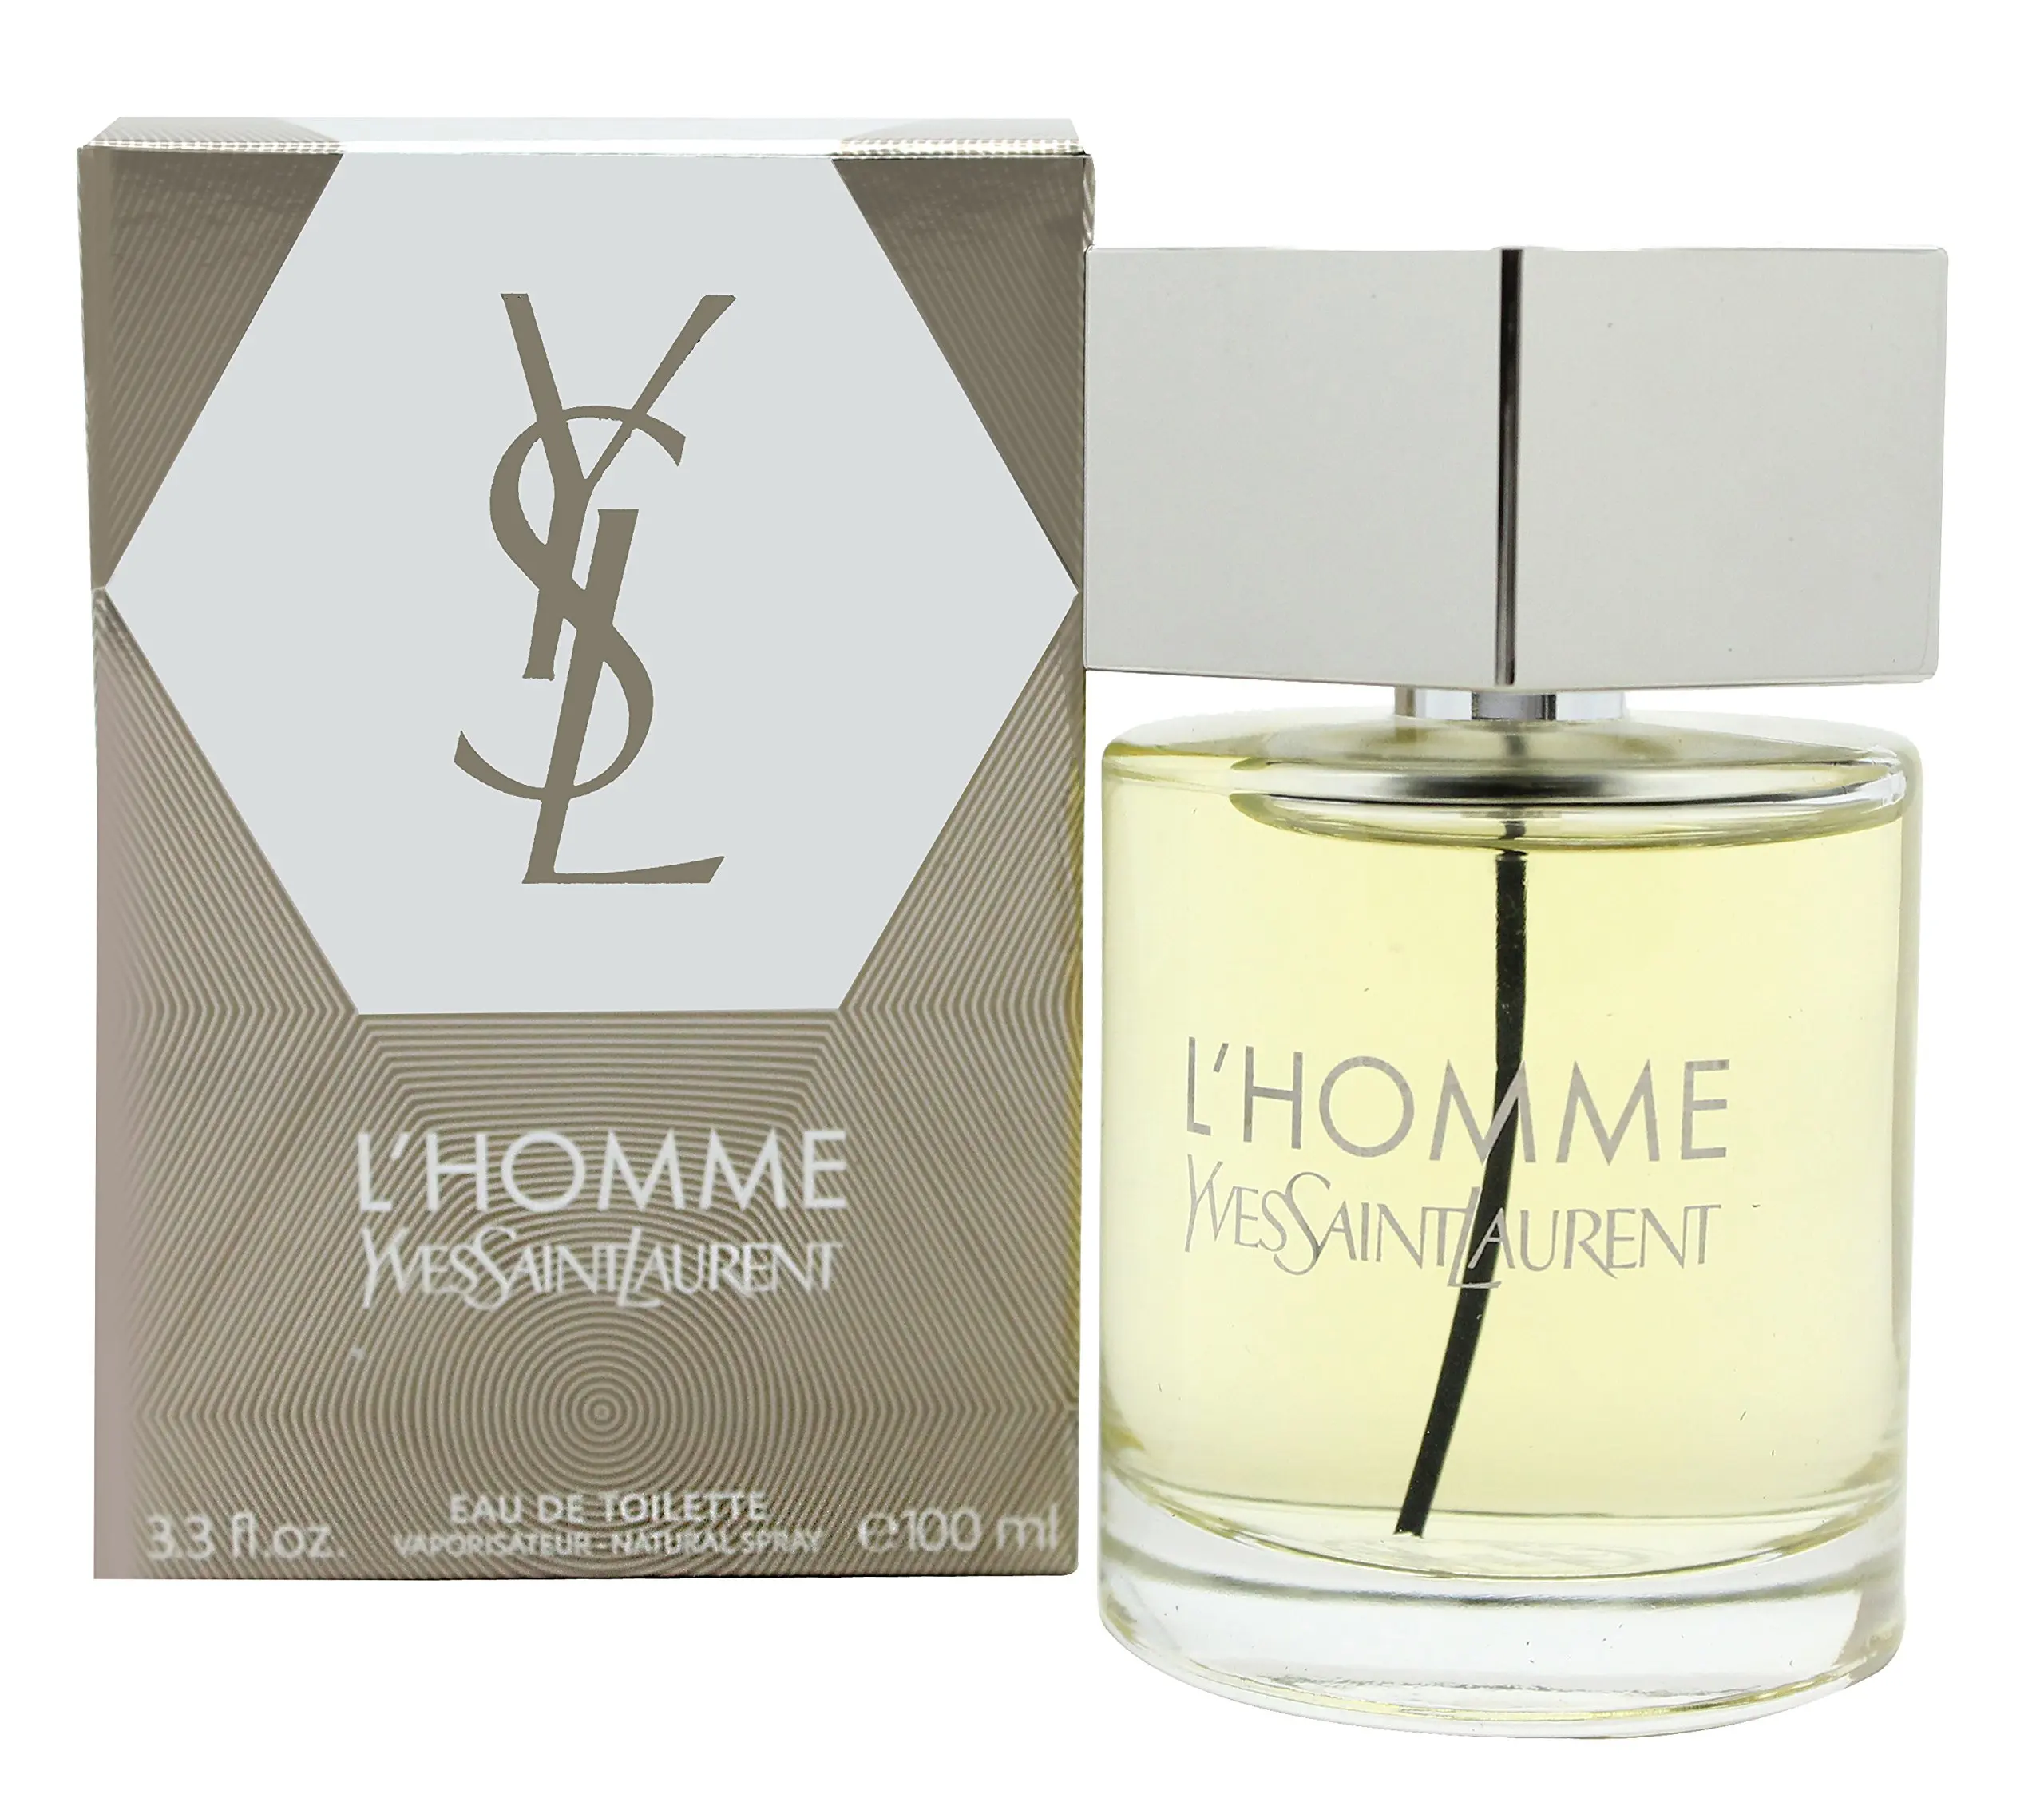 Cheap Ysl Homme, find Ysl Homme deals on line at Alibaba.com